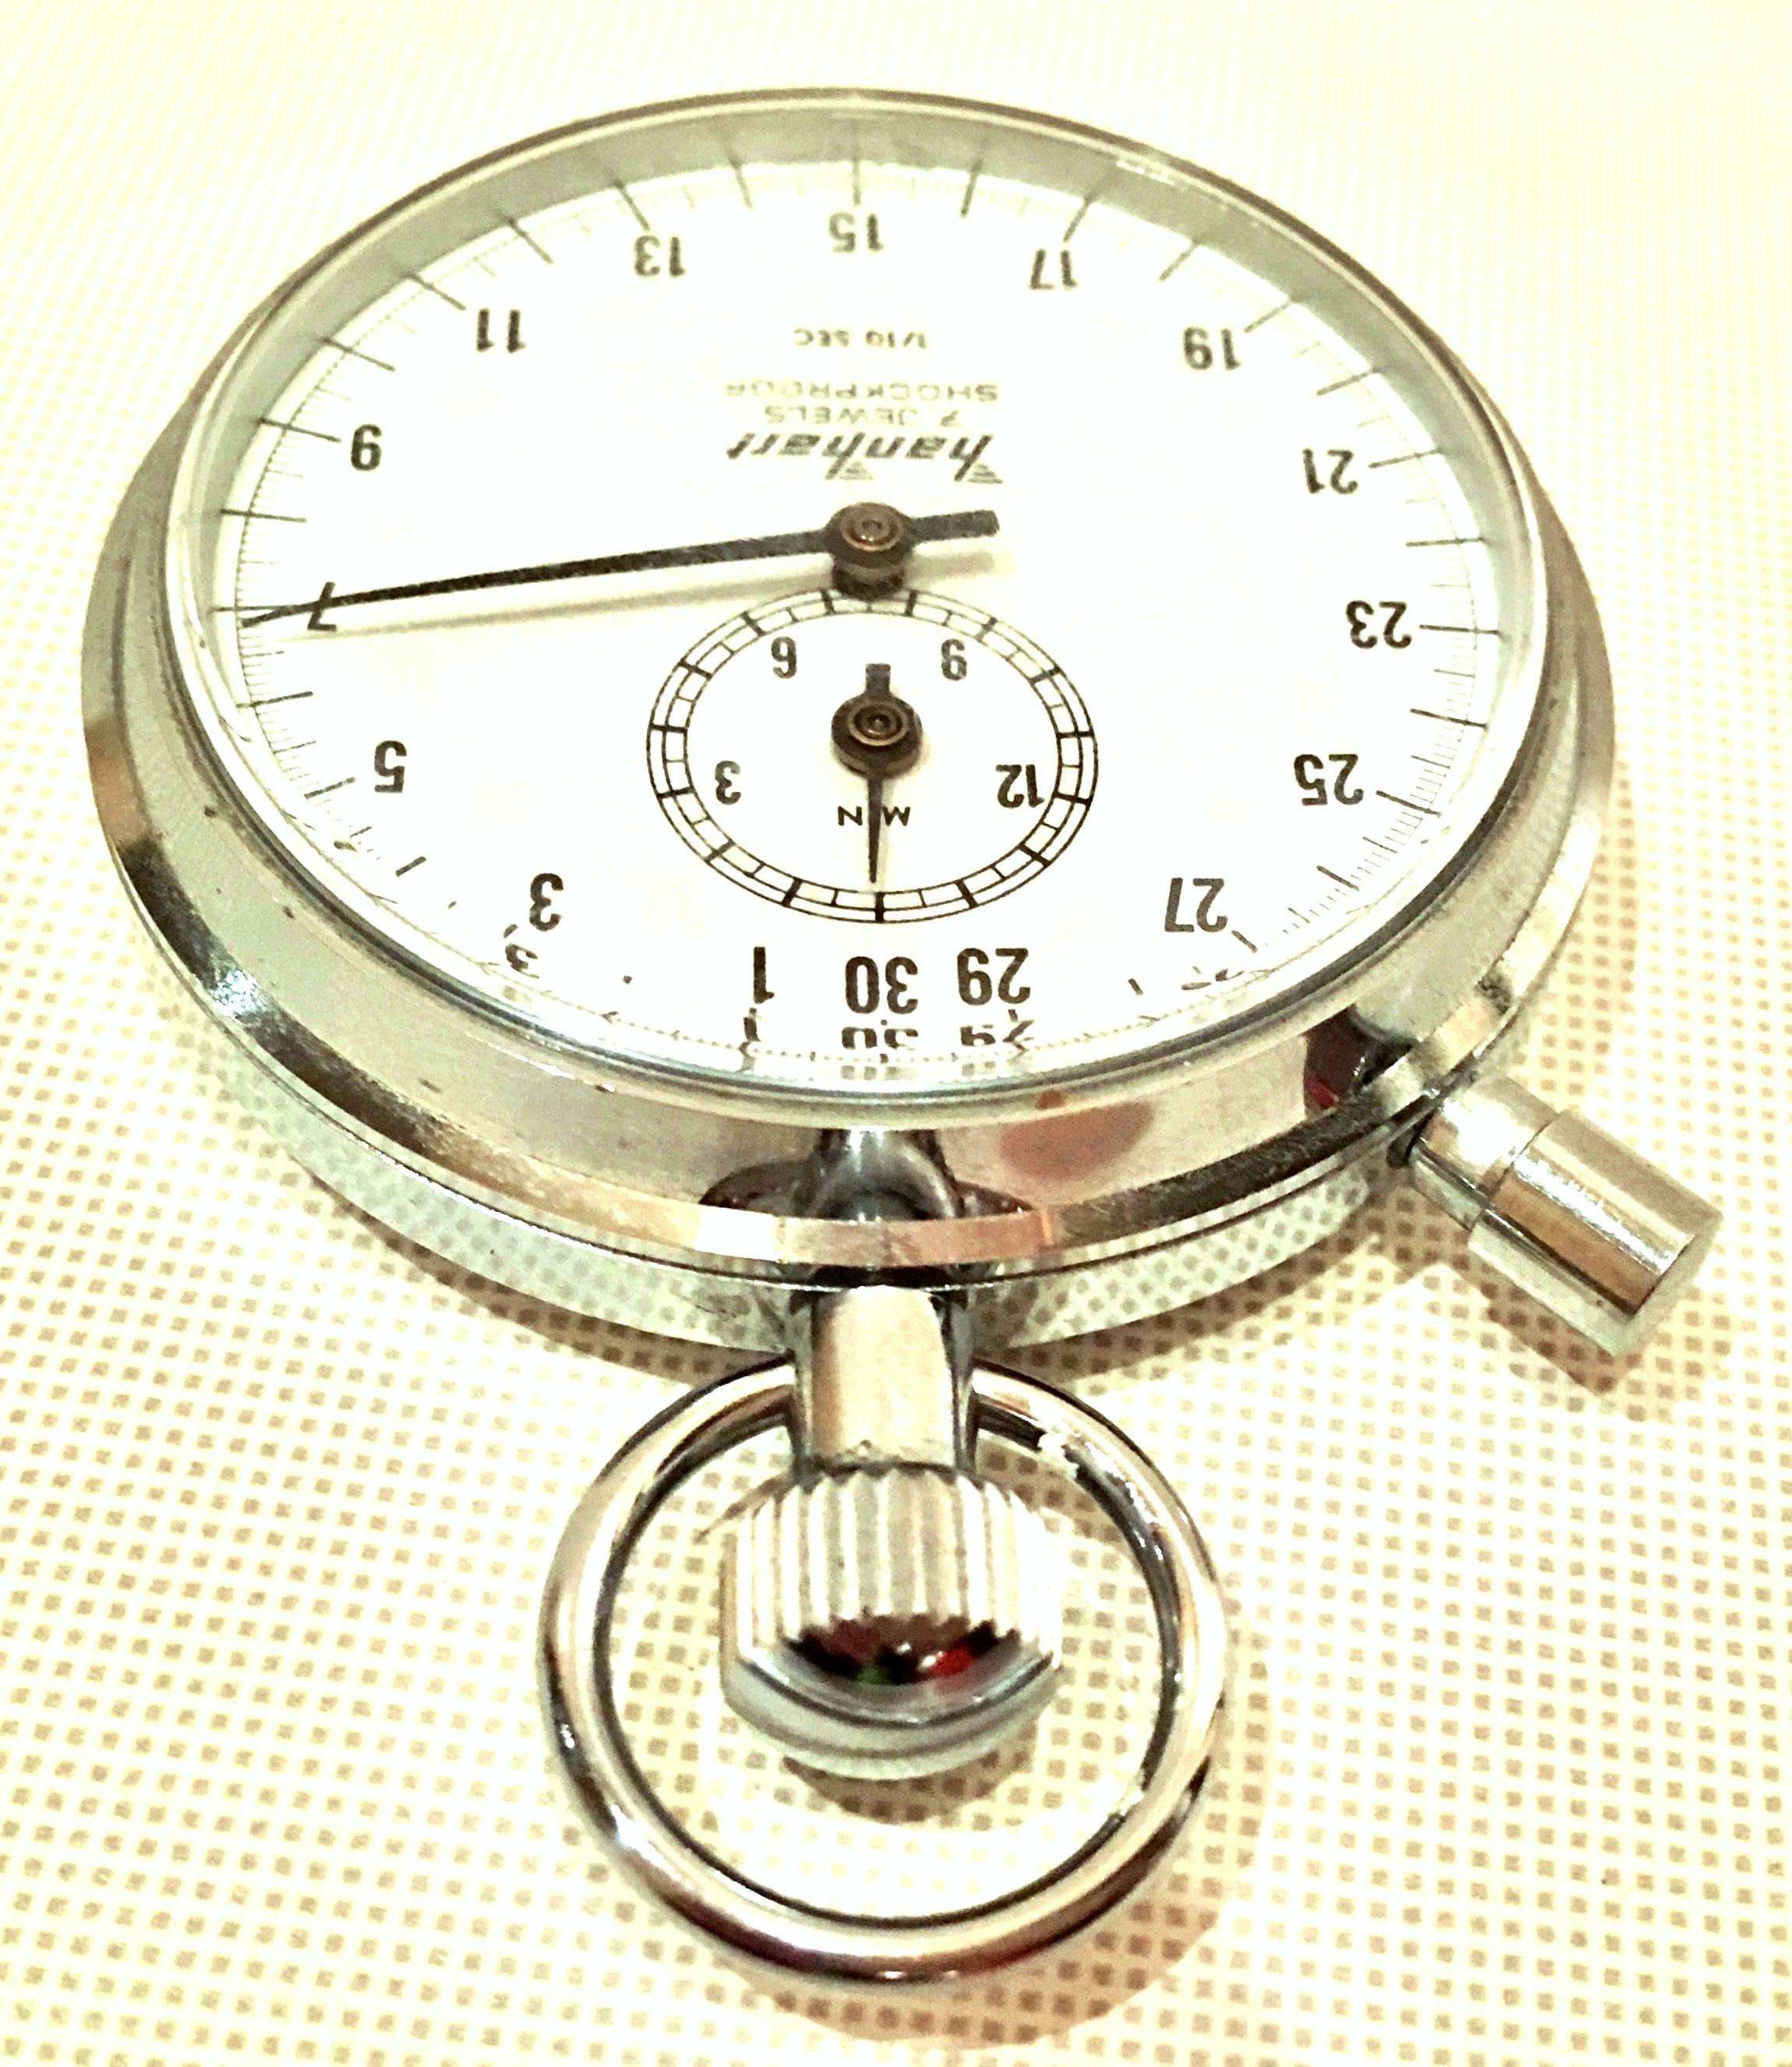 Vintage German Hanhart Chrome 7 Jewel 1/10 Second Stop Watch In Good Condition For Sale In West Palm Beach, FL